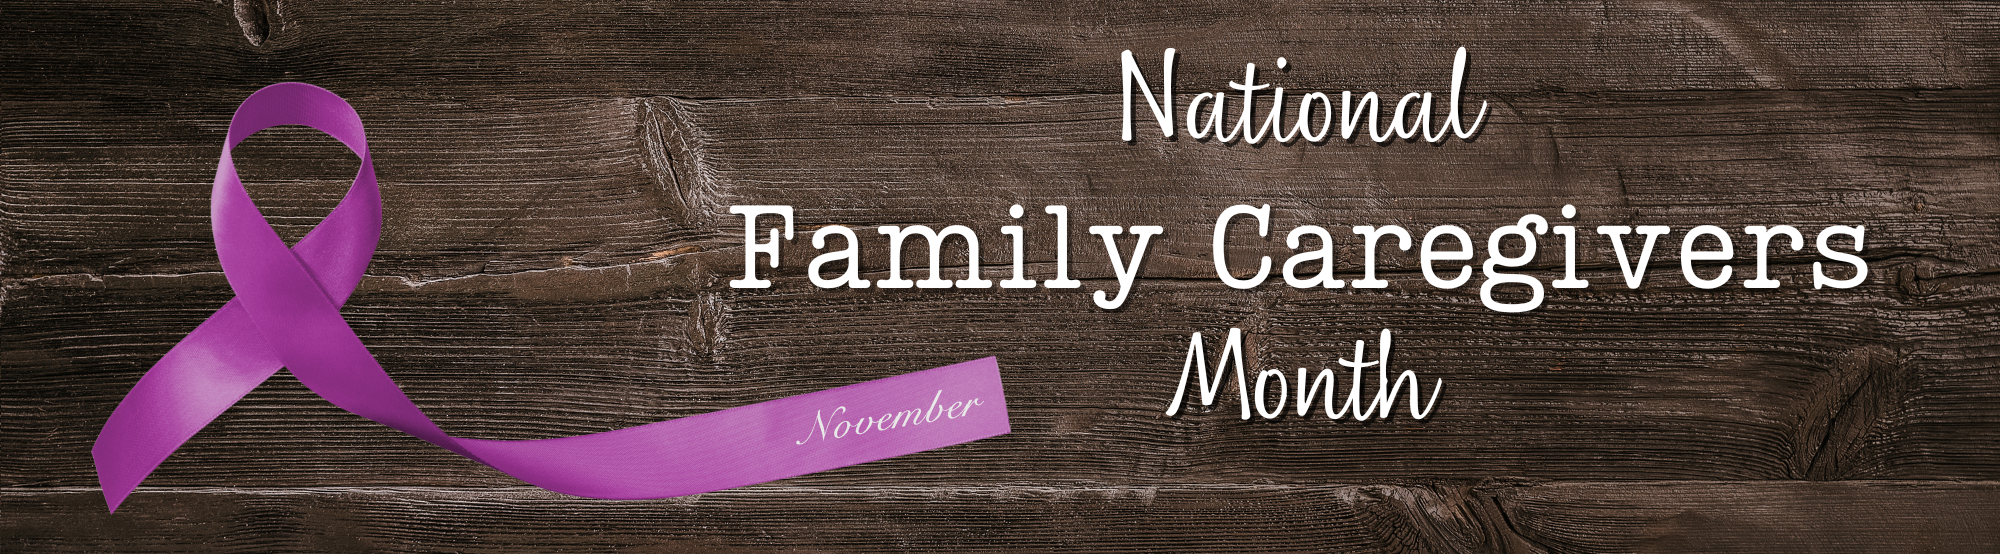 Decorative heading with the text: National Family Caregivers Month